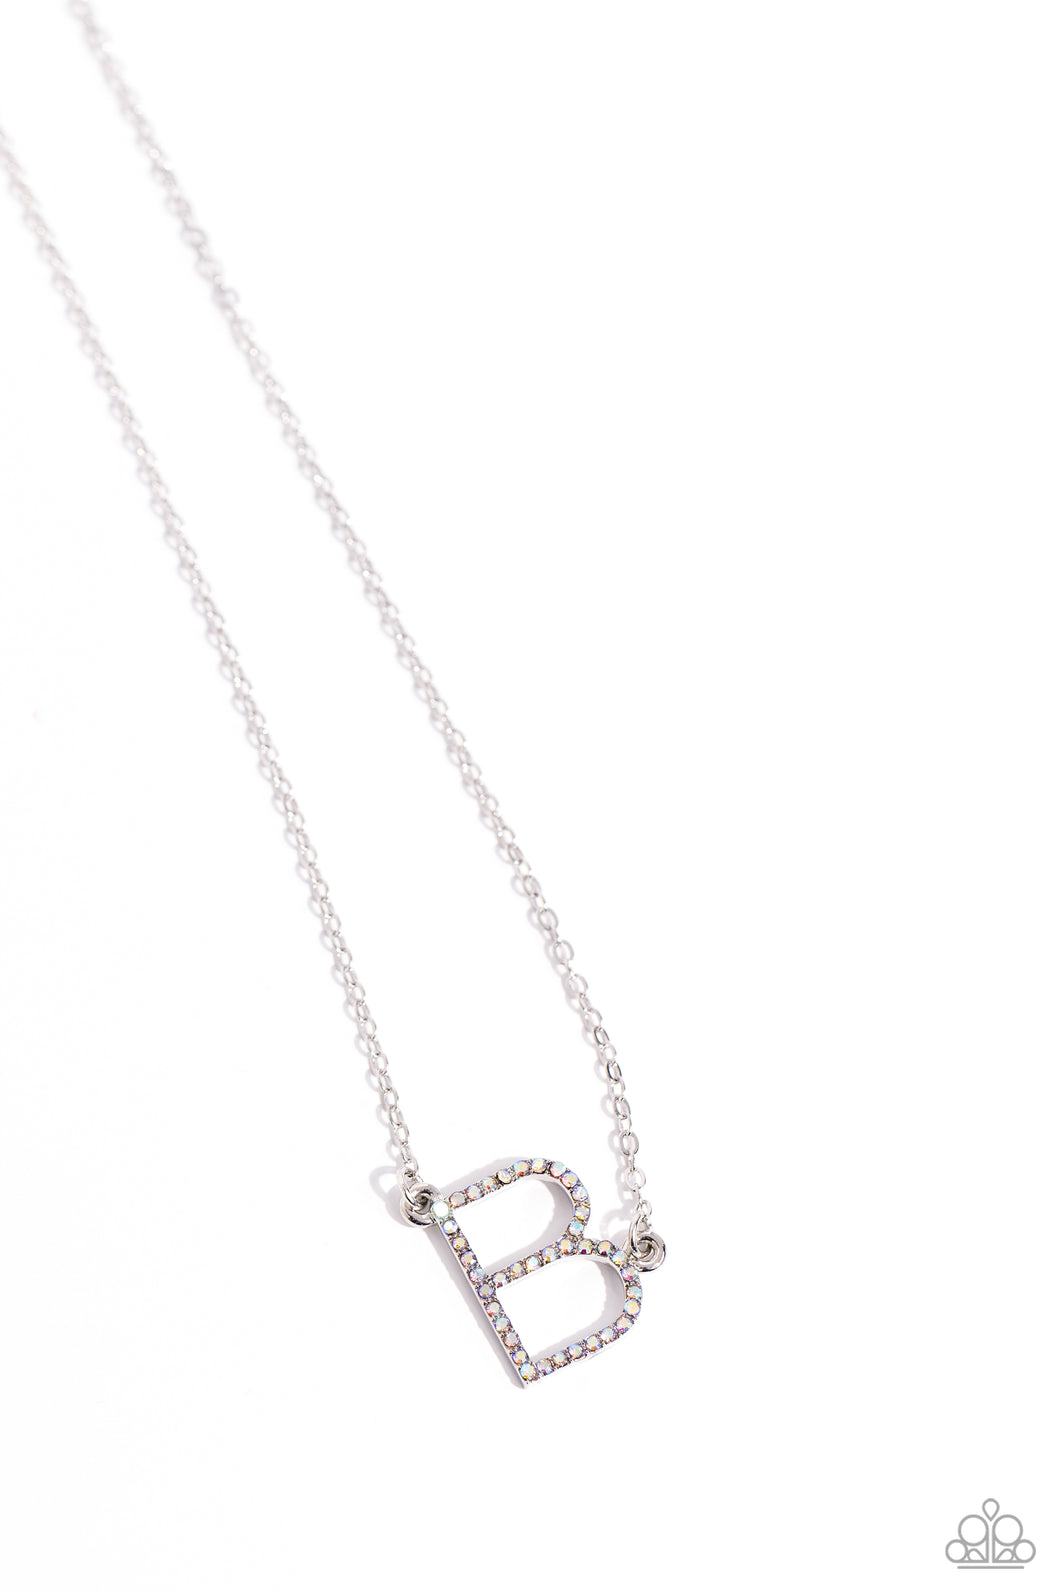 INITIALLY Yours - B - Multi (Iridescent) Necklace